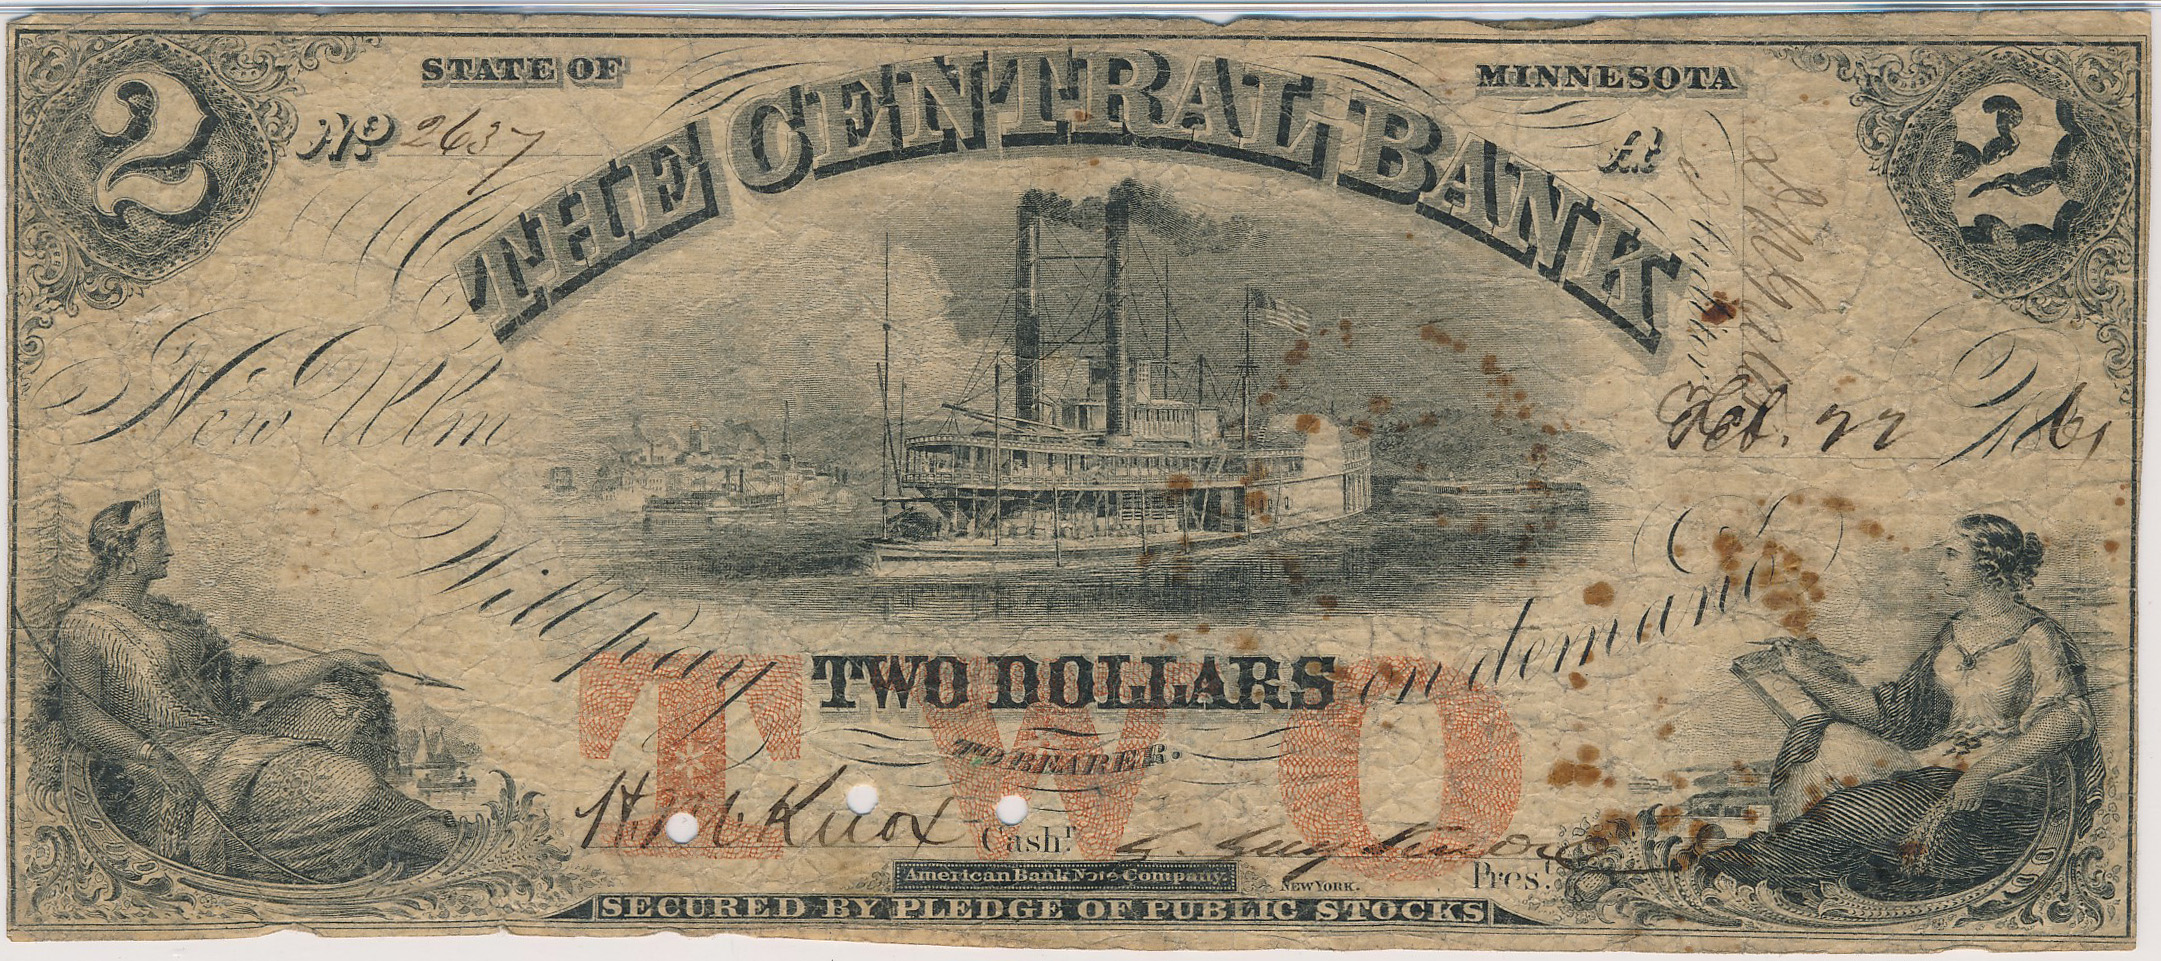 $2 Central Bank